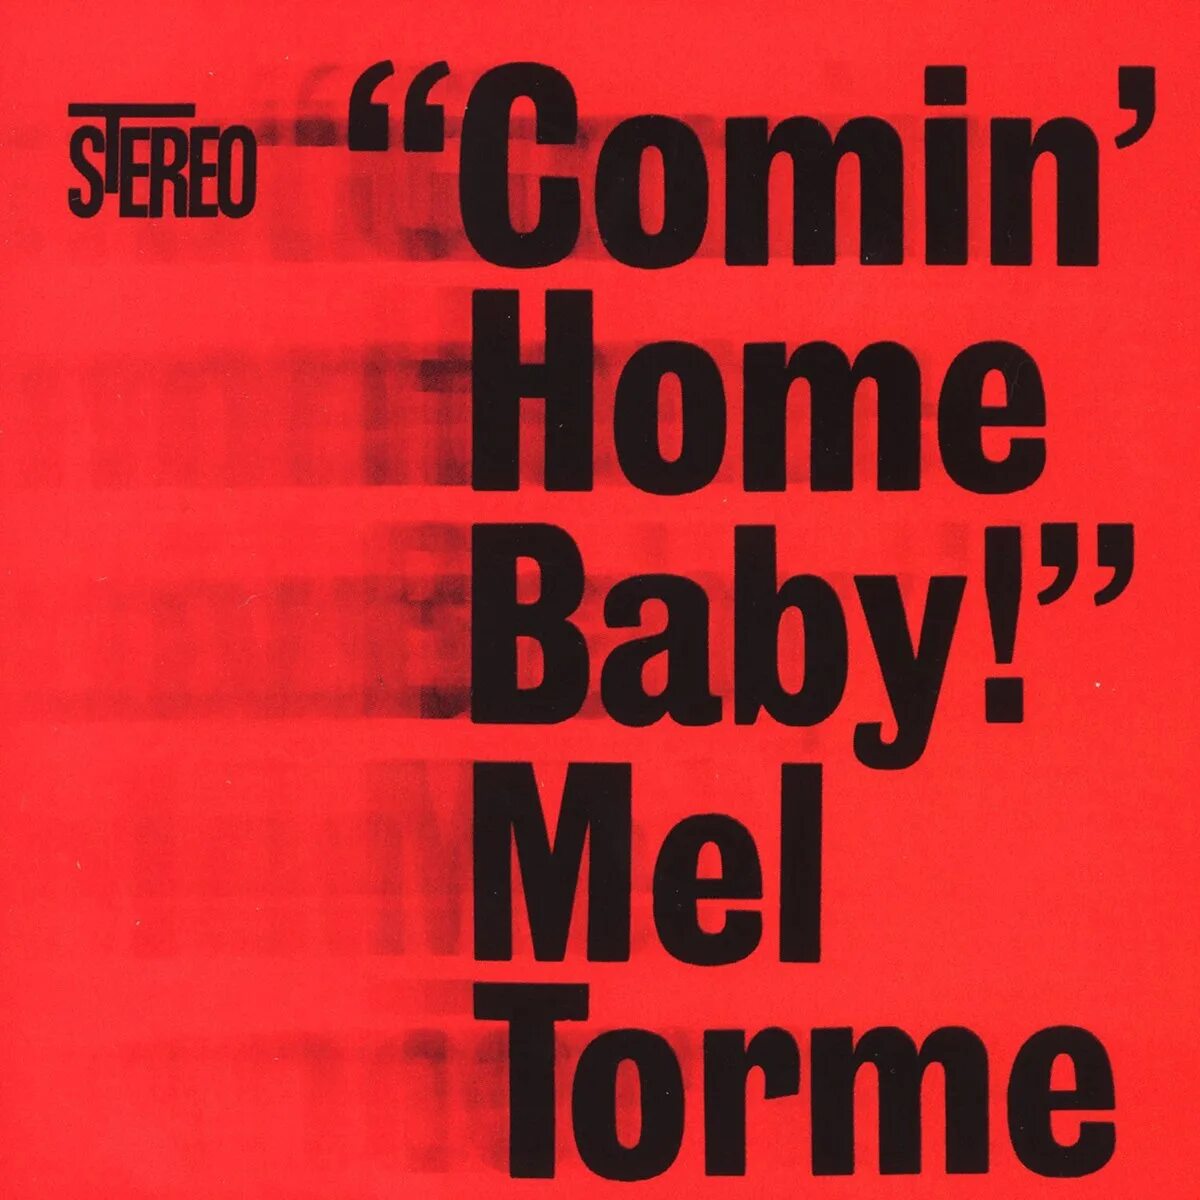 We coming home now. Mel Torme - Comin Home Baby. Comin'Home. Coming Home Baby. Бейби мел.